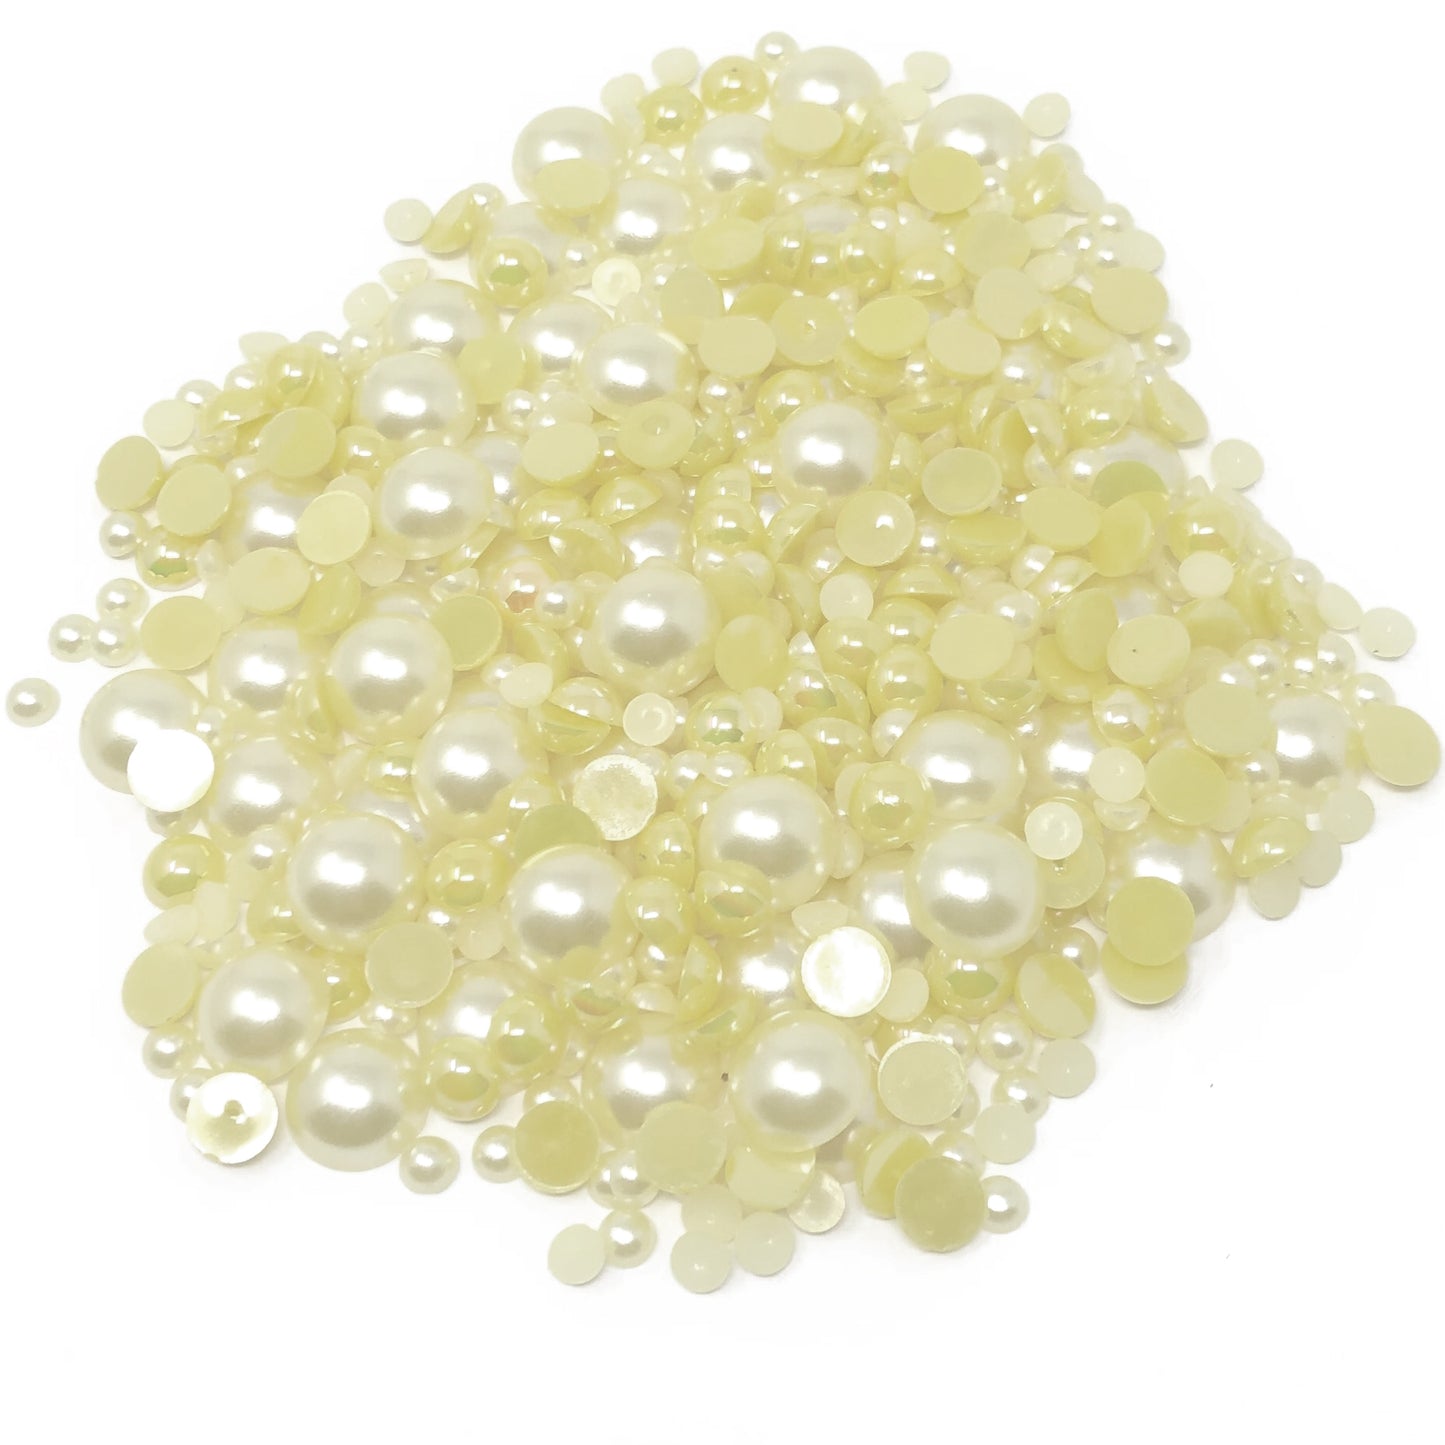 Ivory Mini Resin Mixed Size Half Pearls (Pack of 500 Approx)